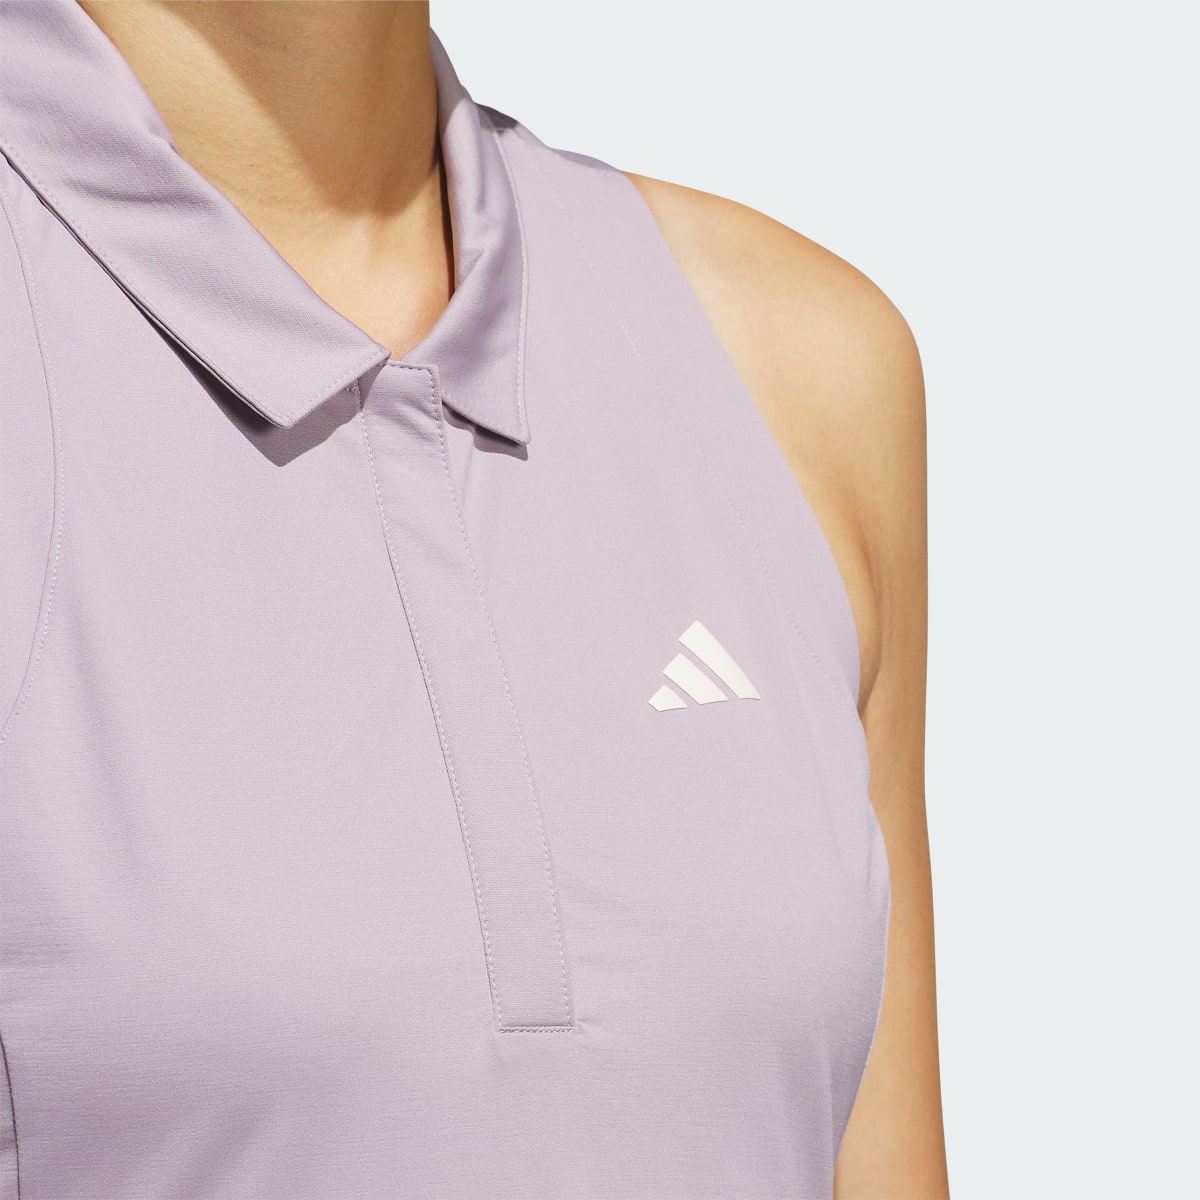 Adidas Women's Ultimate365 Tour Pleated Dress. 9